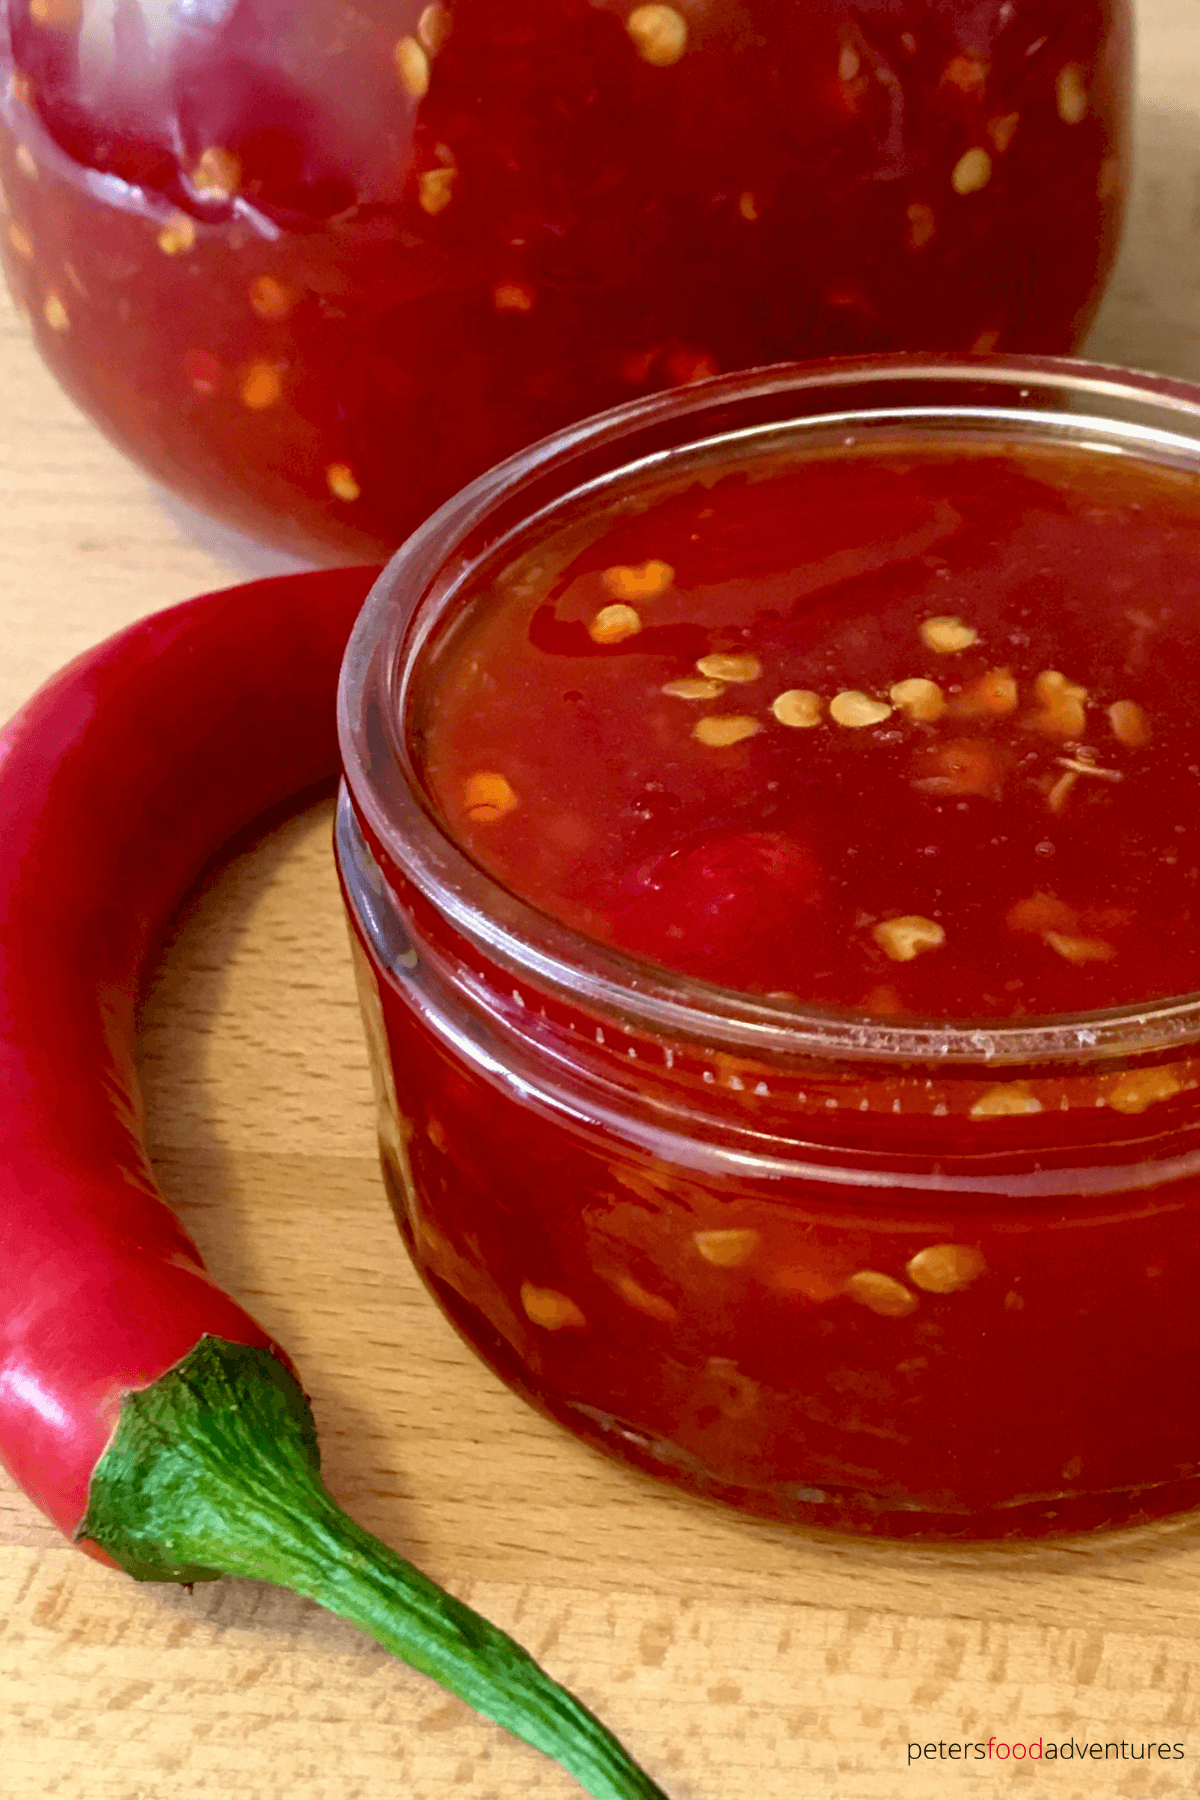 This Homemade Thai Sweet Chili Sauce has so much flavor with red chilis, garlic and ginger. An exotic sauce that's sweet and spicy, a perfect dipping sauce, marinade and flavor booster! Known as name chim (น้ำจิ้มไก่) which means "dipping sauce for chicken".